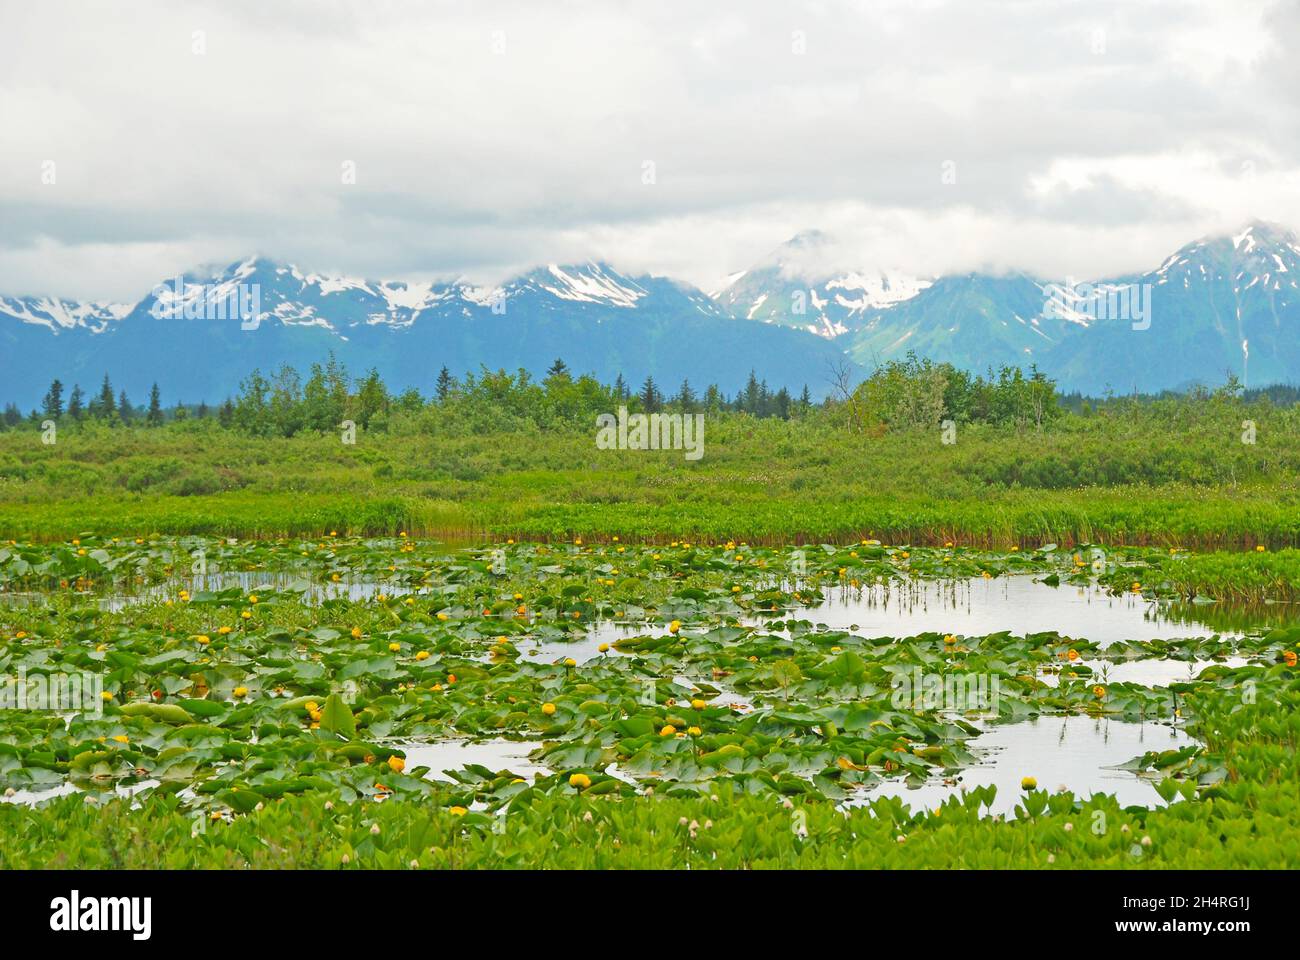 Lilies in a wetland in the Copper River Valley in Alaska Stock Photo